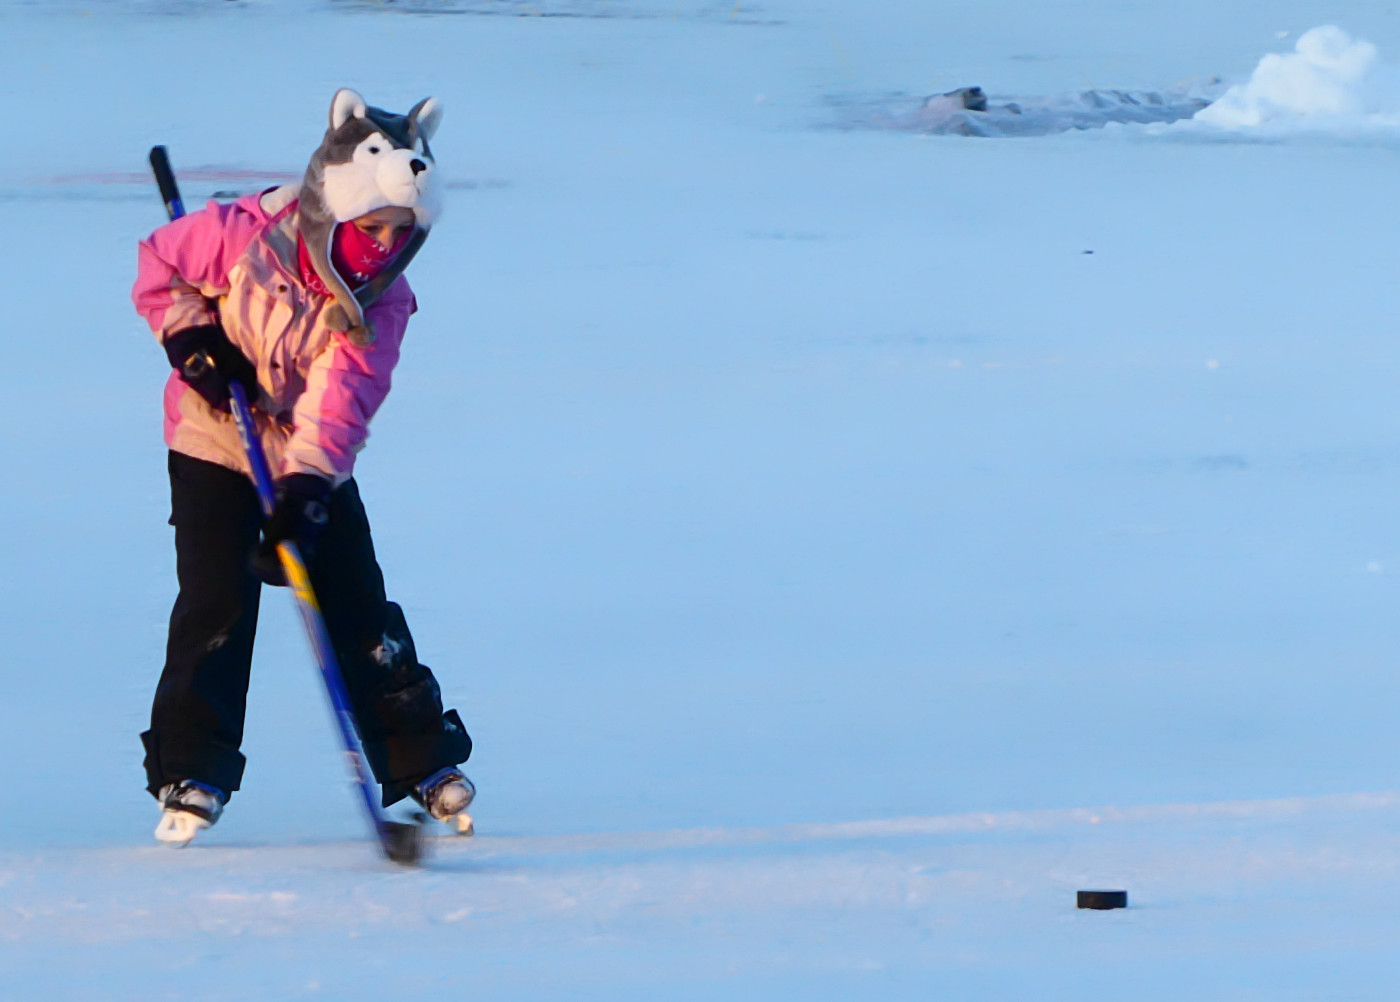 young girl with hot pink jacket skating with a hockey stick towards a puck on blu-ish white ice